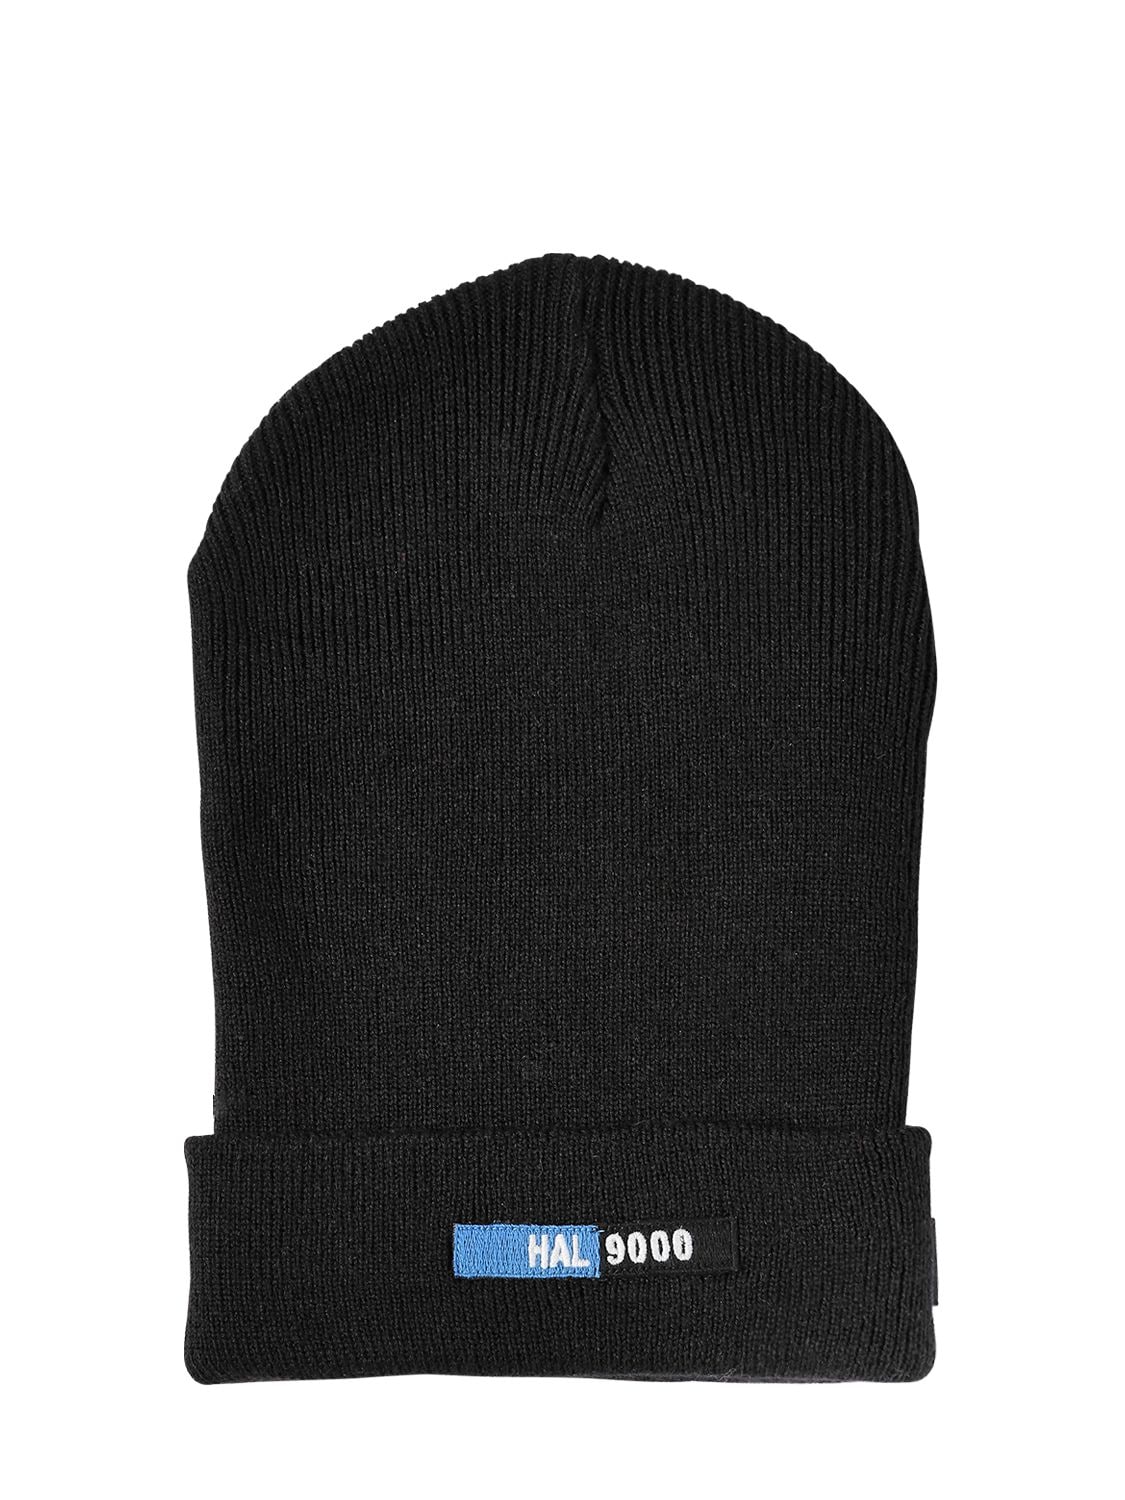 Undercover Patch Wool Blend Knit Beanie Hat In Black